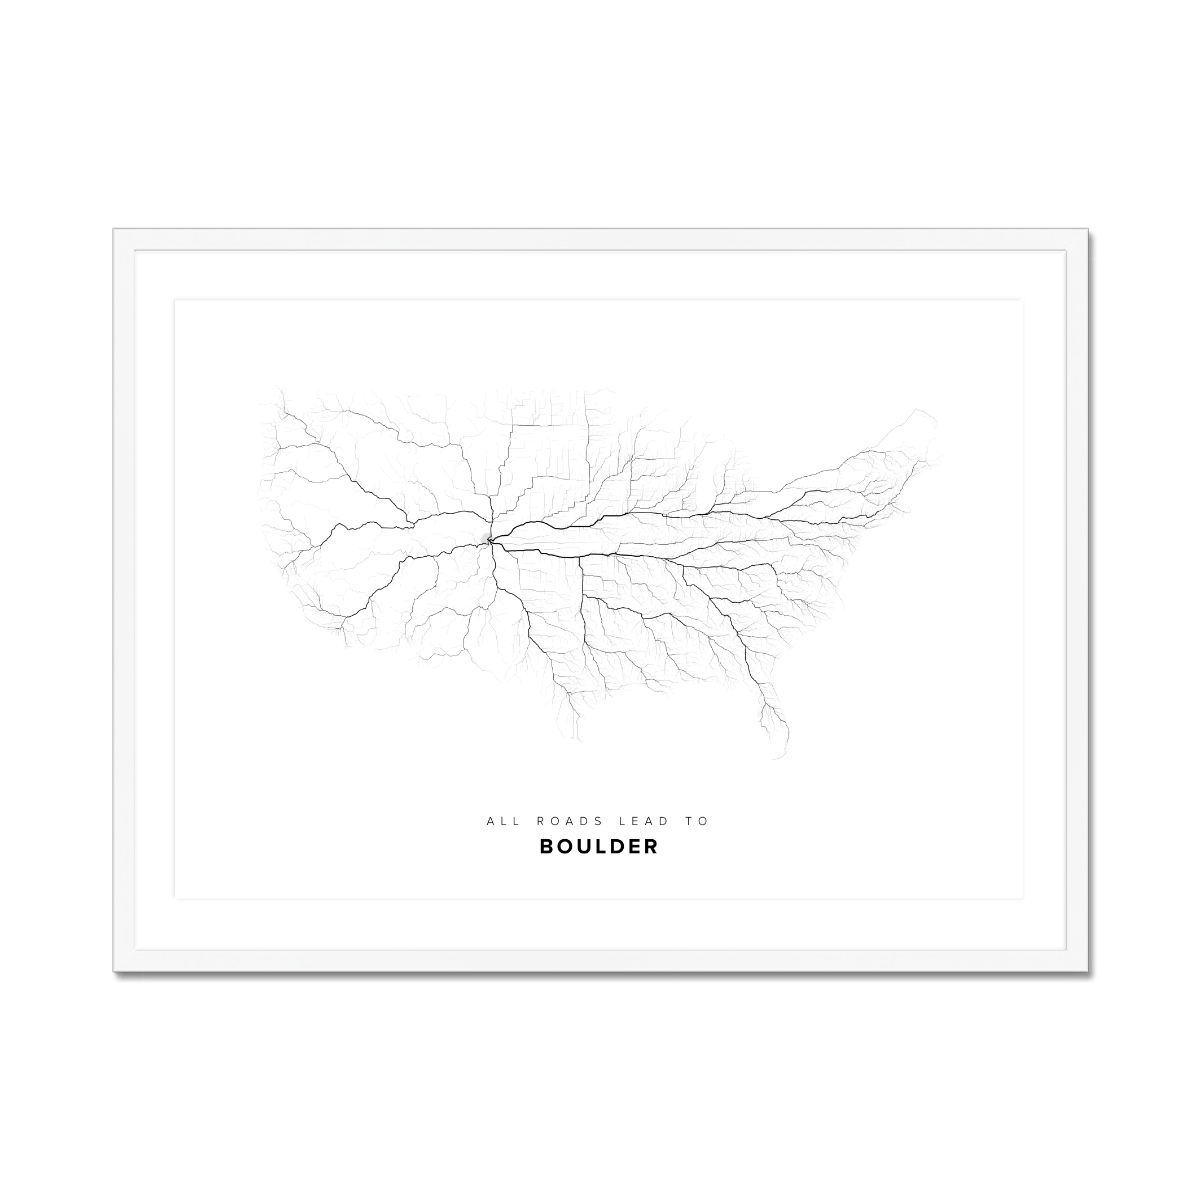 All roads lead to Boulder (United States of America) Fine Art Map Print